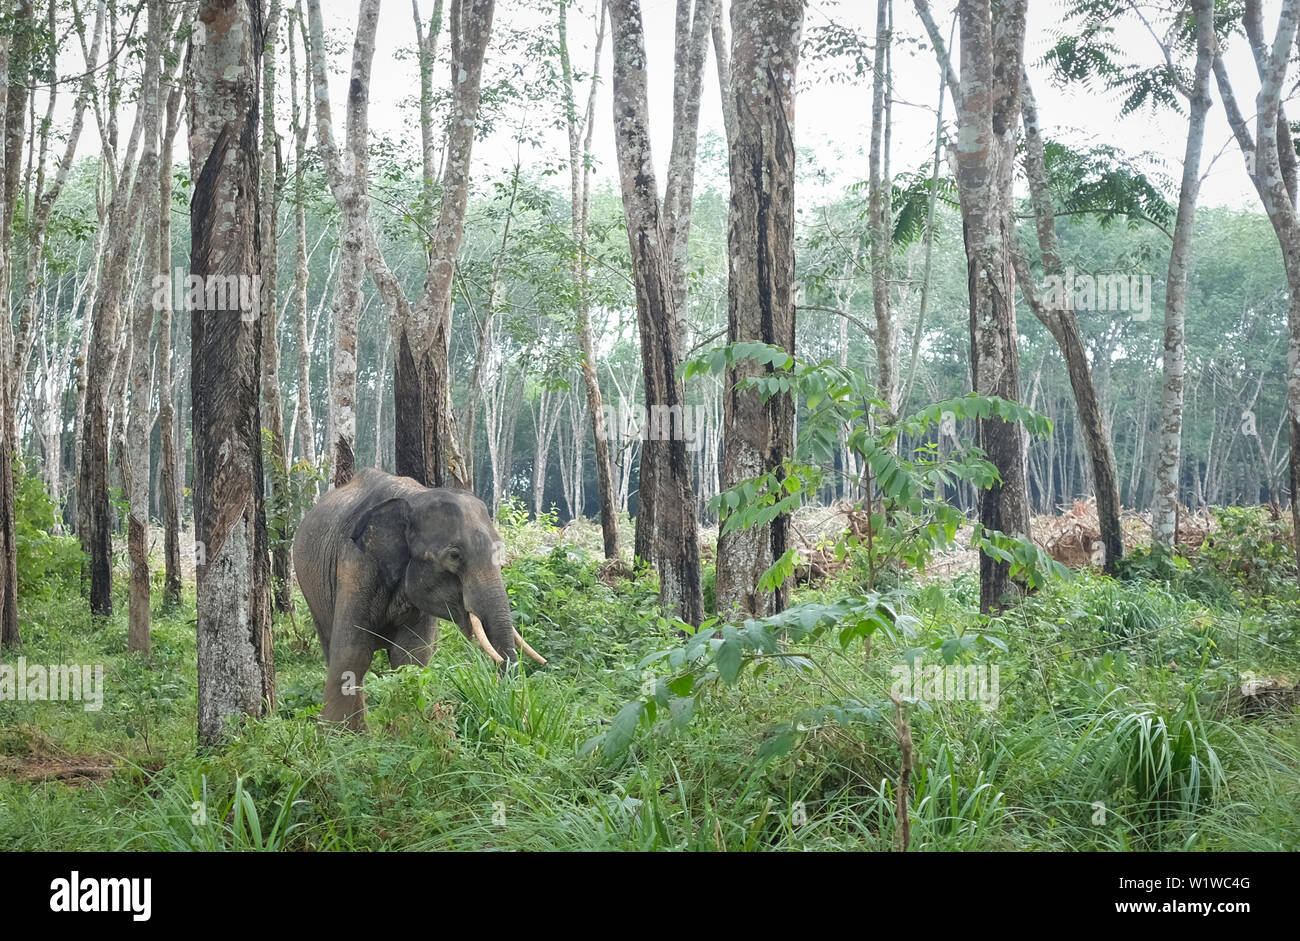 One elephant living in the nature Stock Photo